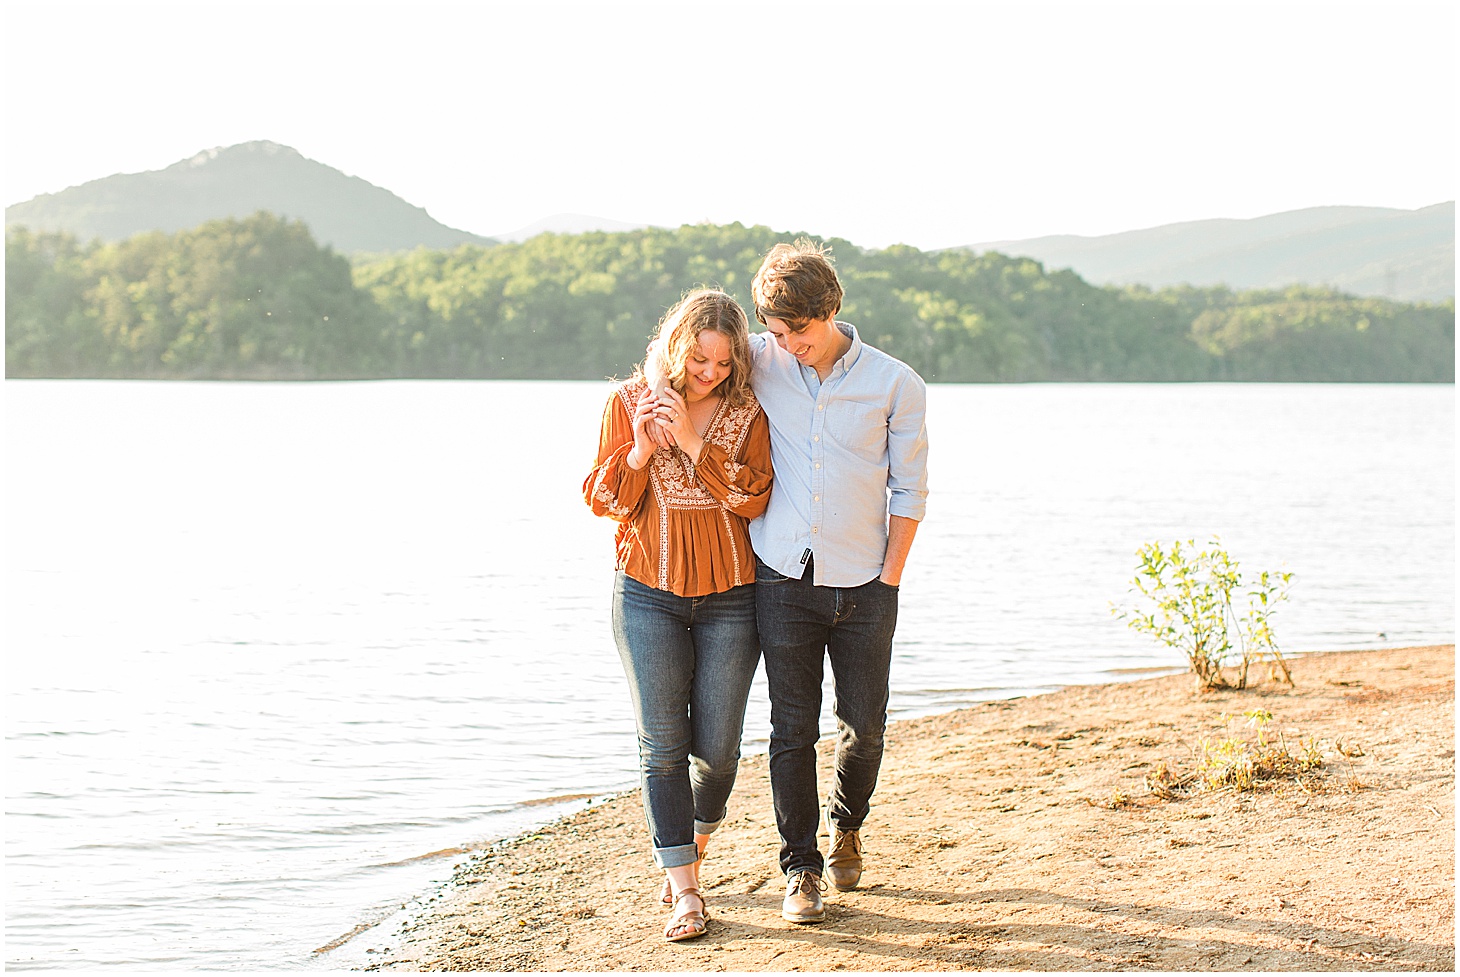 carvinscoveengagementsession_roanokeengagementsession_carvinscove_virginiawedding_virginiaweddingphotographer_vaweddingphotographer_photo_0017.jpg